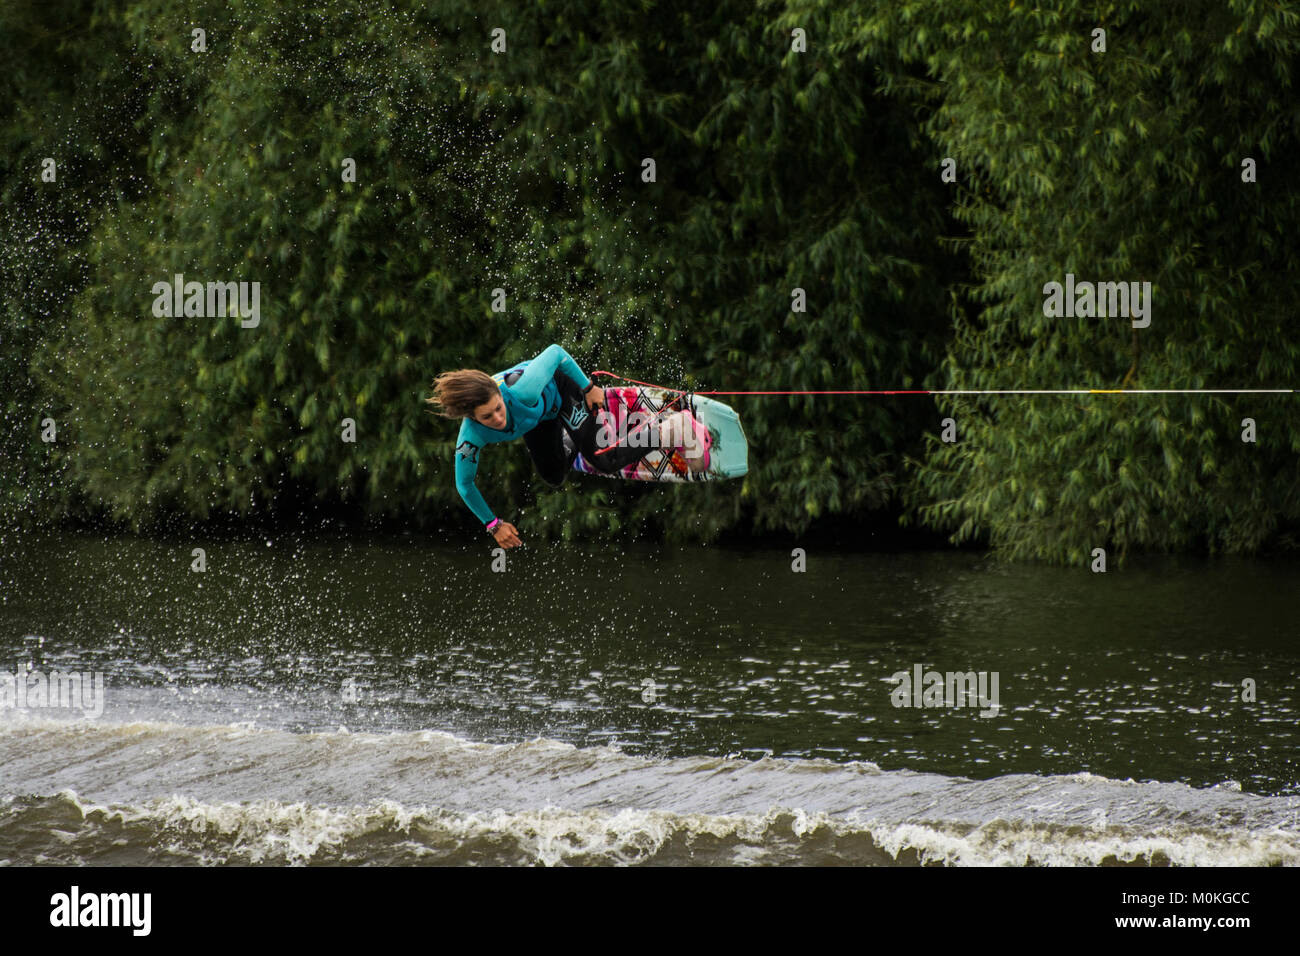 River Bann, Coleraine, Northern Ireland. - August 13th, 2016 :- A competitor in the European & African Wakeboard Championships on the River Bann Coler Stock Photo